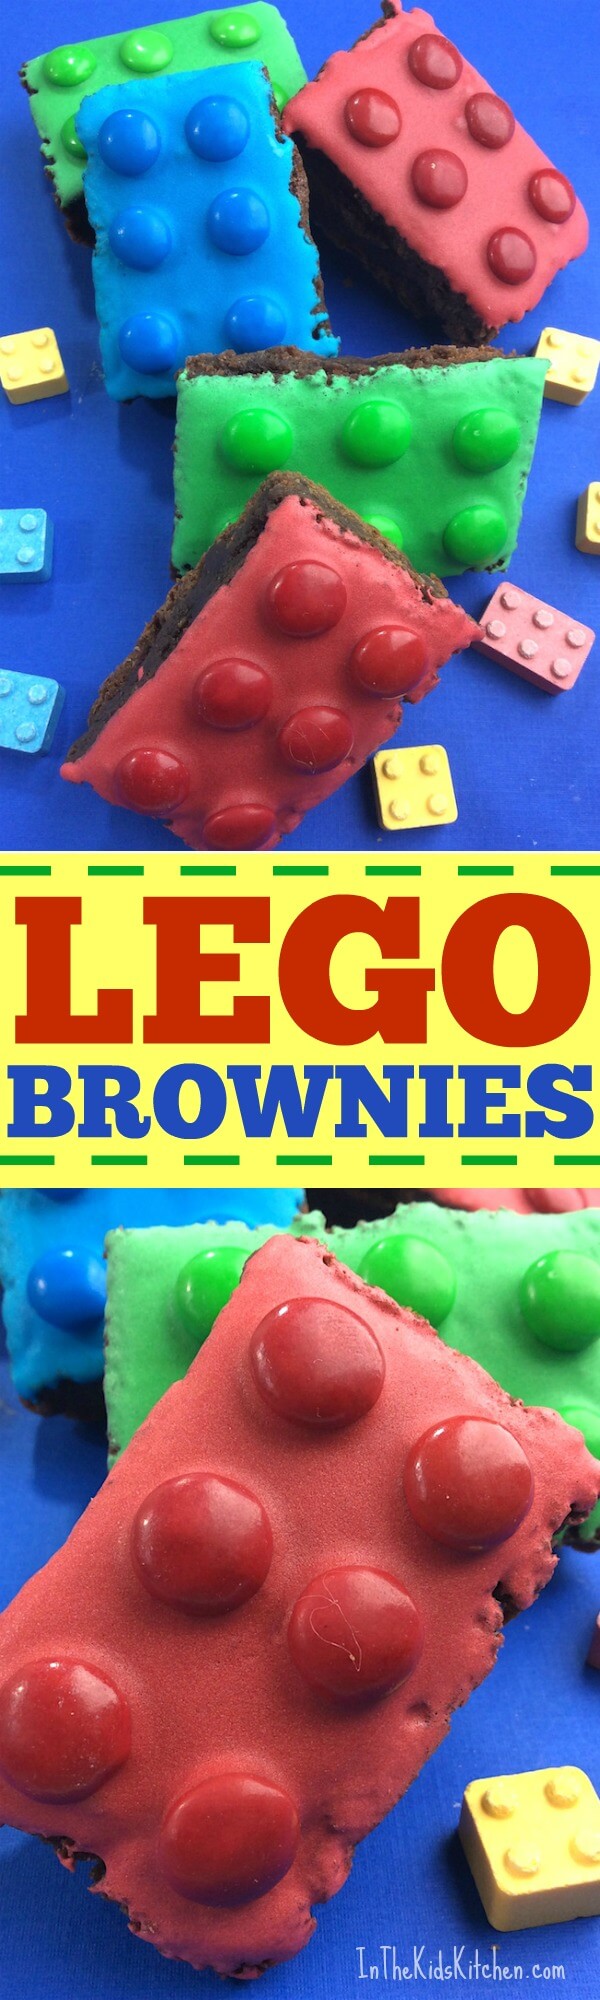 Perfect for a kids birthday party, bake sales, or to celebrate the new LEGO movies -- these colorful LEGO Brownies are the coolest dessert ever!